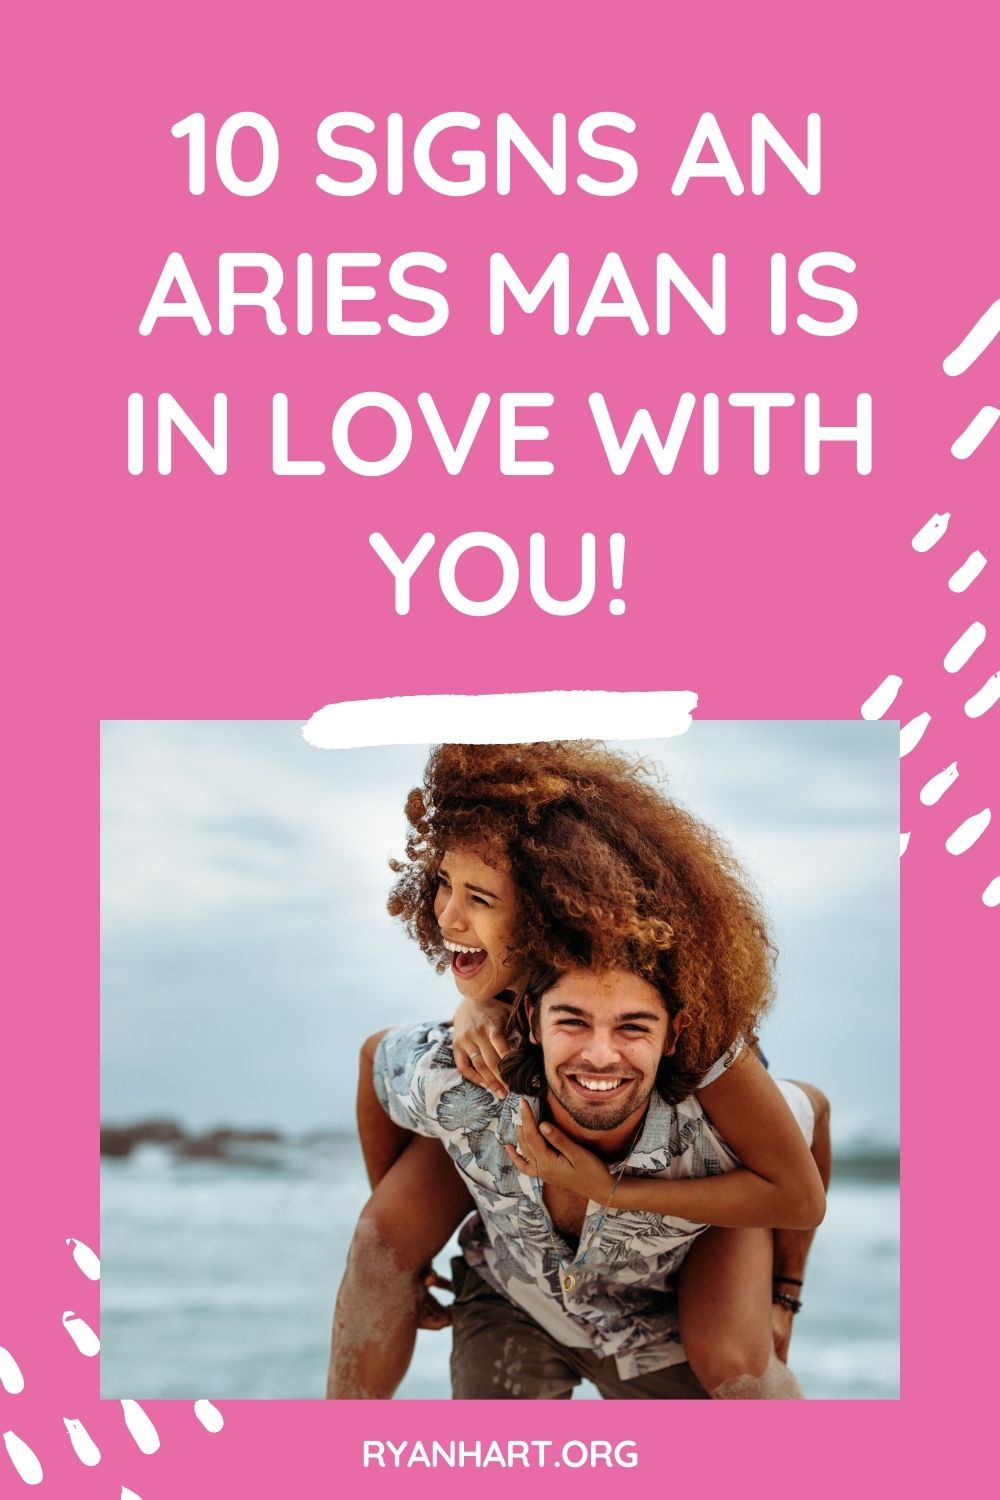 Man aries signs you a shy likes Here’s How